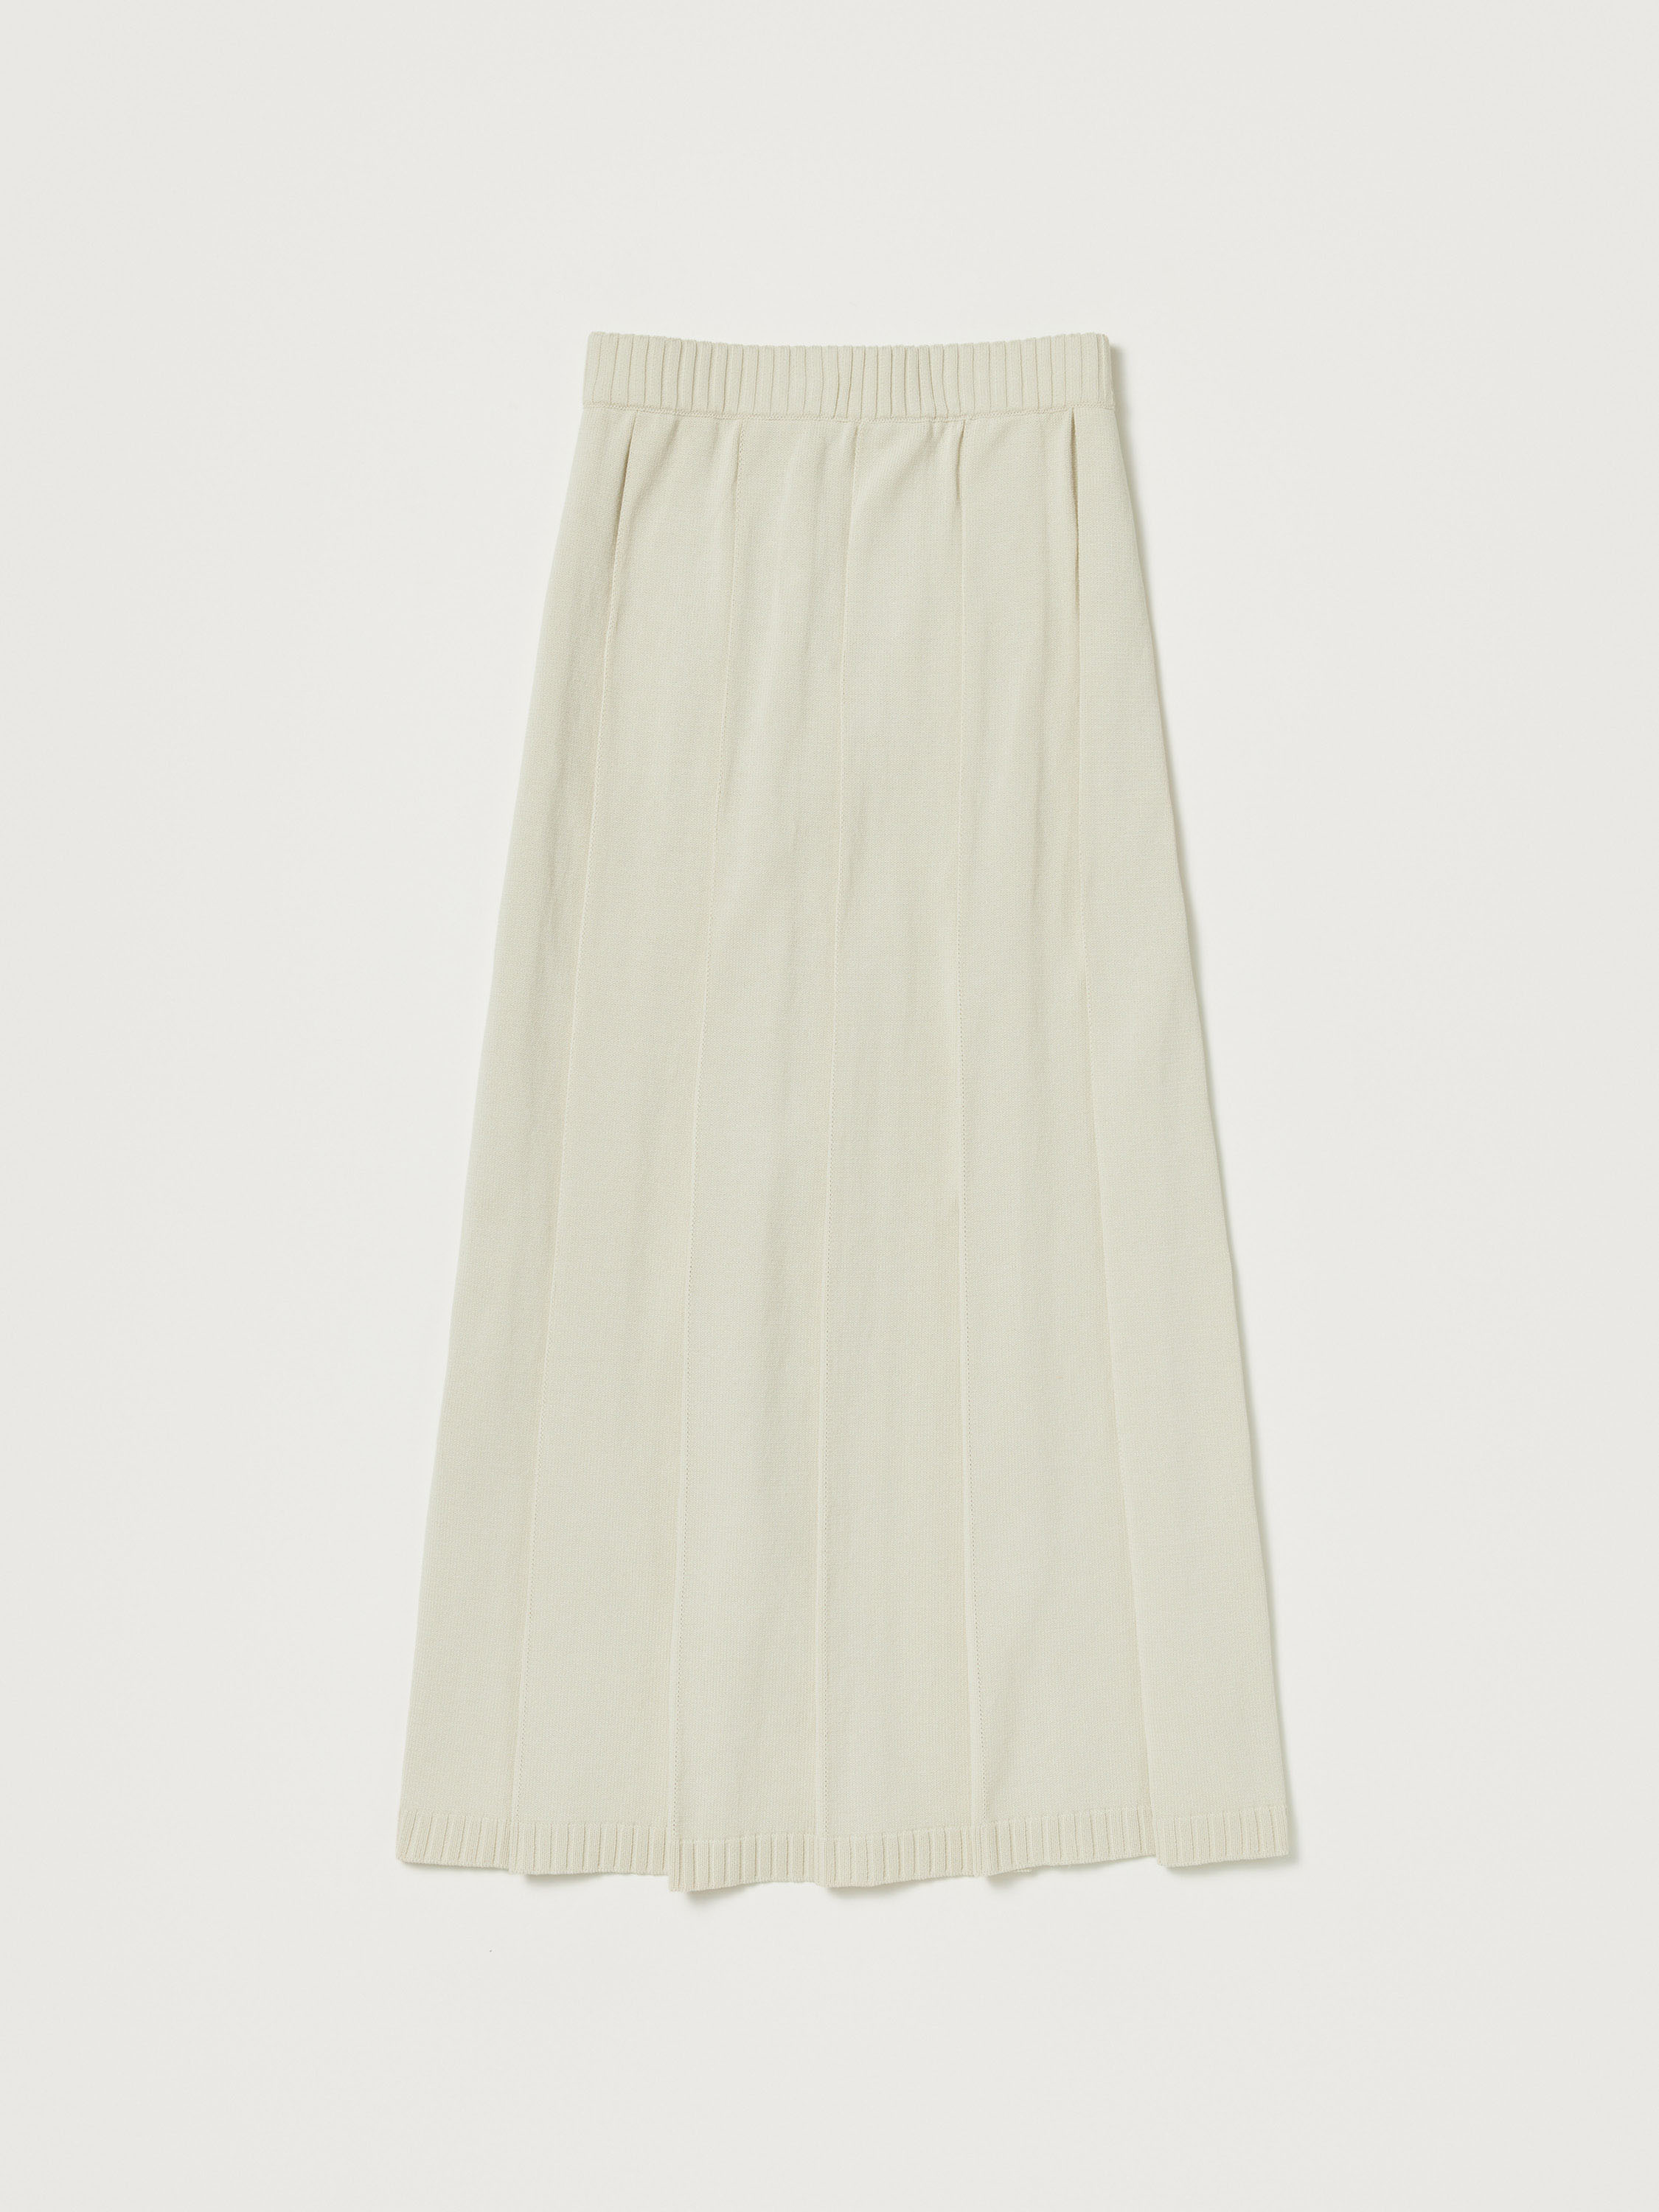 DRY COTTON KNIT PLEATED SKIRT 詳細画像 WHITE 1